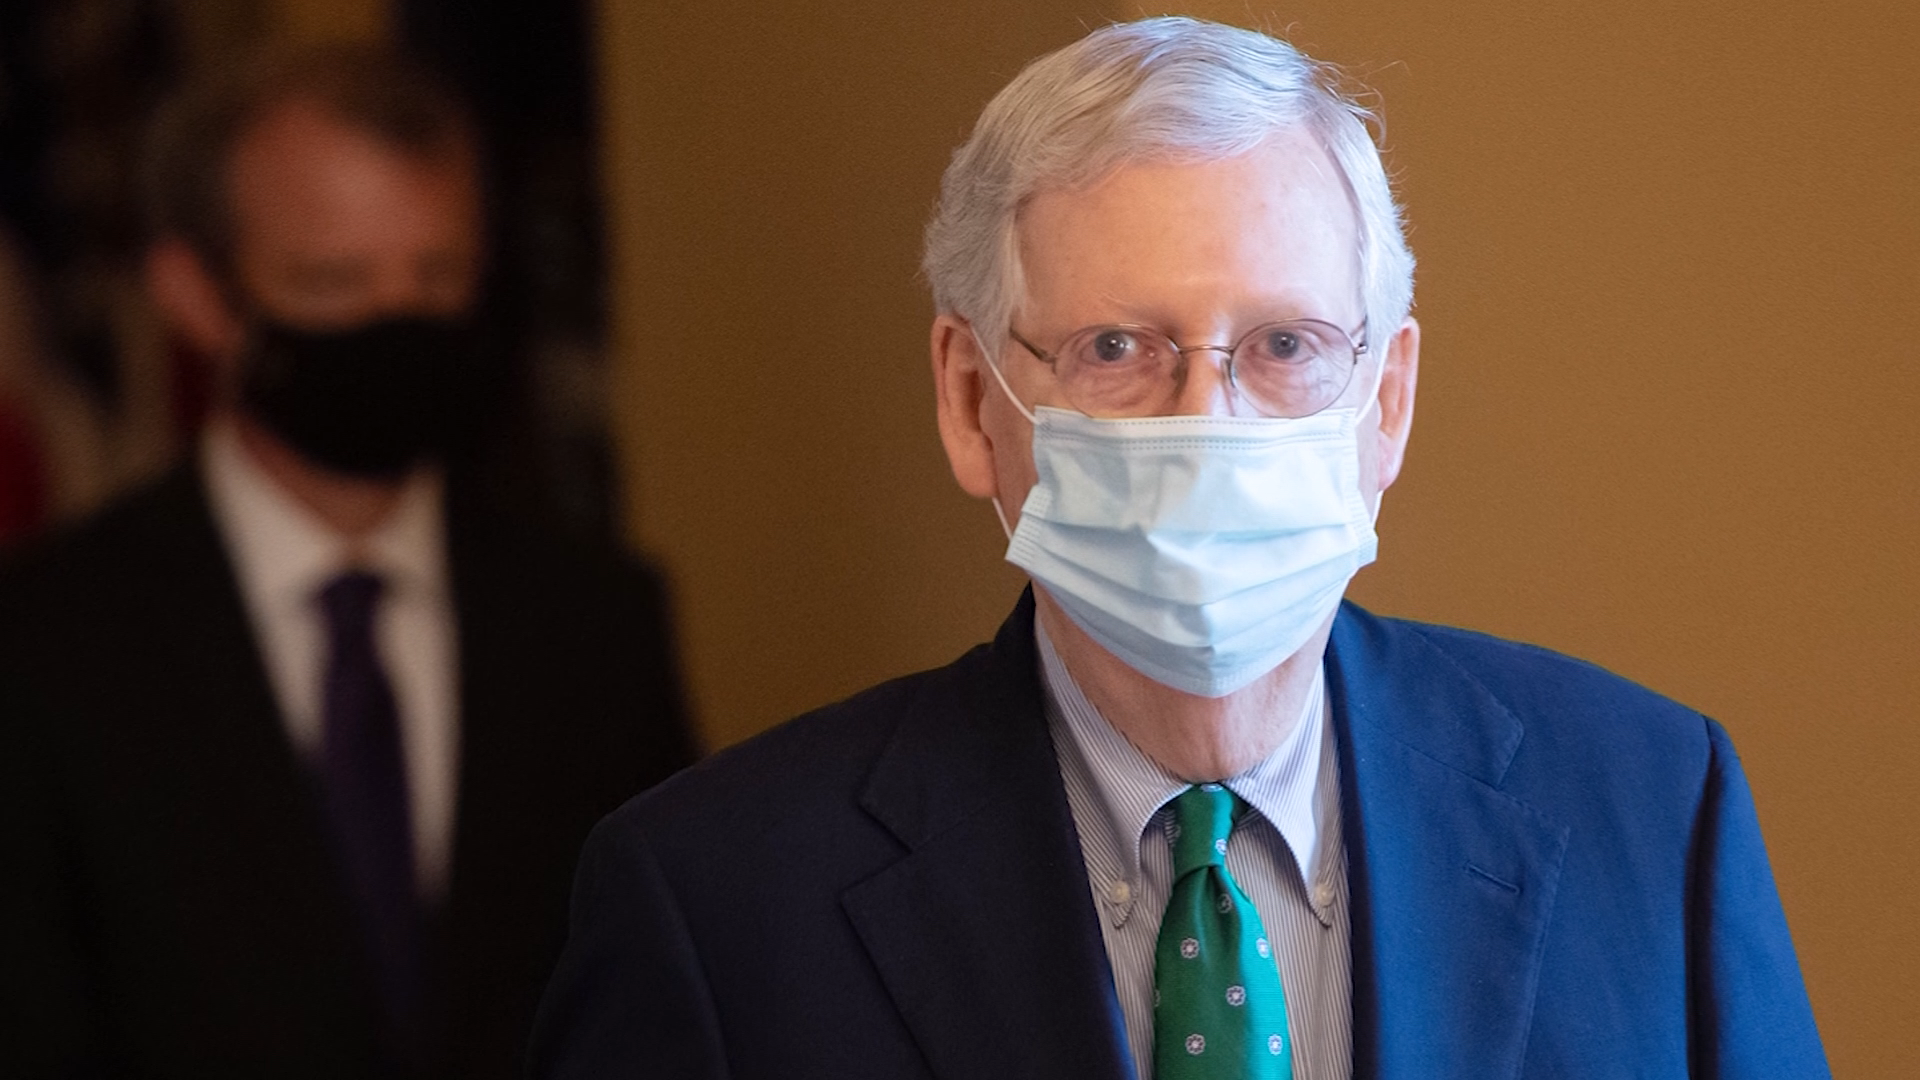 Trump aside, McConnell becomes GOP's preacher on masks - WNKY 40 News